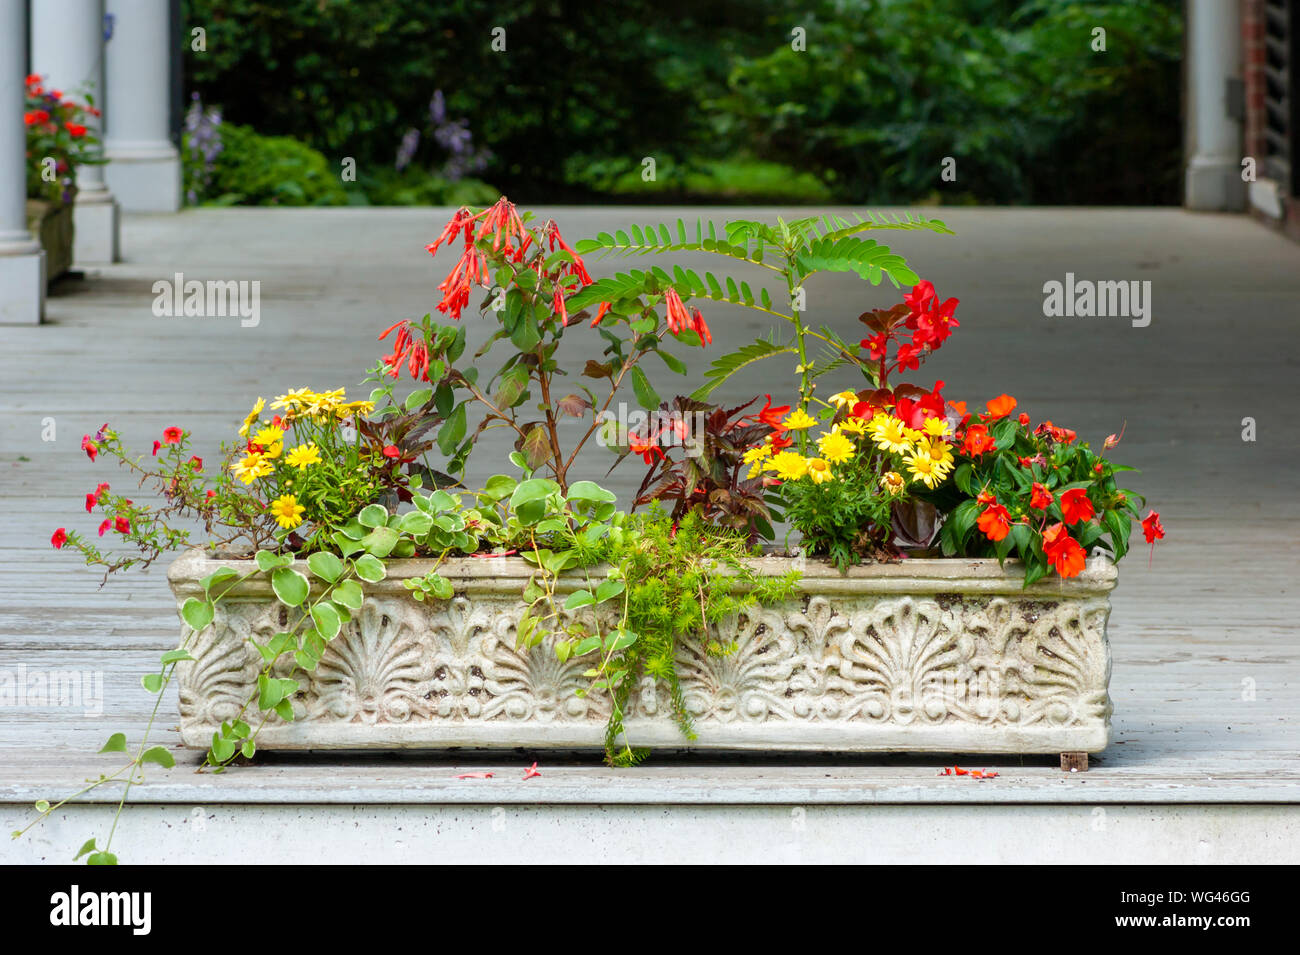 Flower box on a porch. Arrangement of red and yellow flowers and other plants. Sedgwick Gardens on Long Hill estate, in Beverly, MA Stock Photo